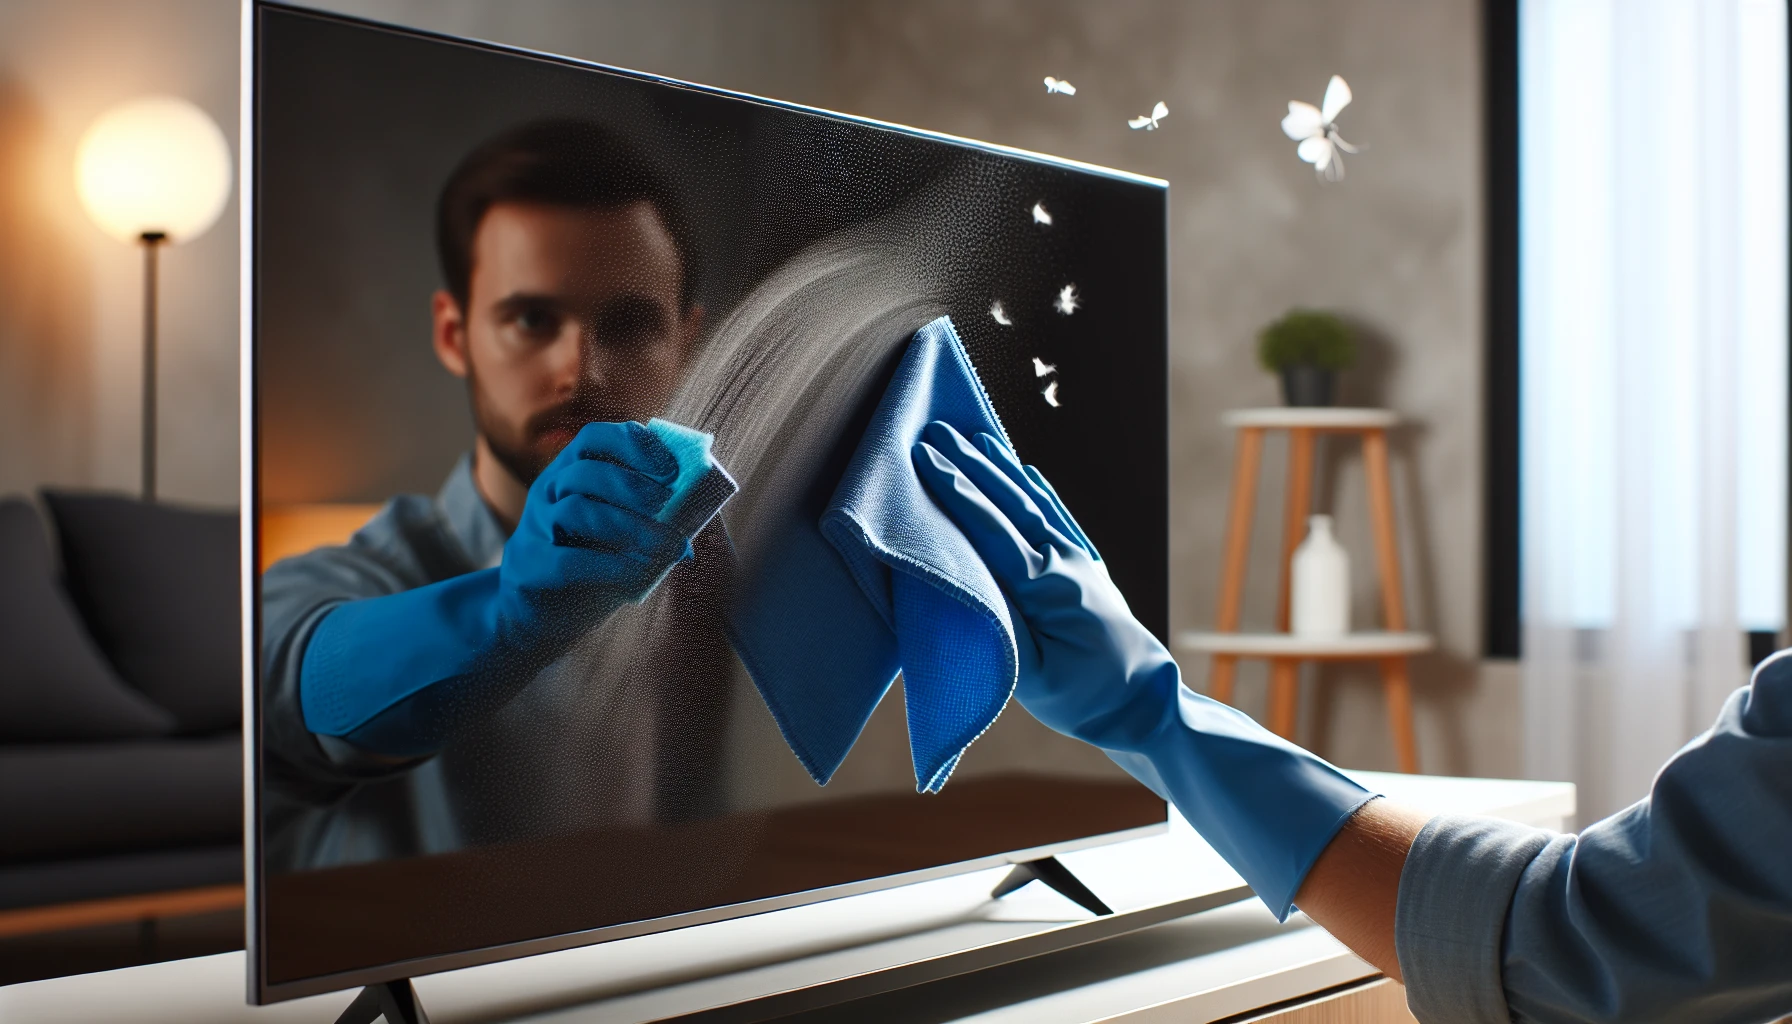 Maintaining a clean TV screen with regular dusting routine